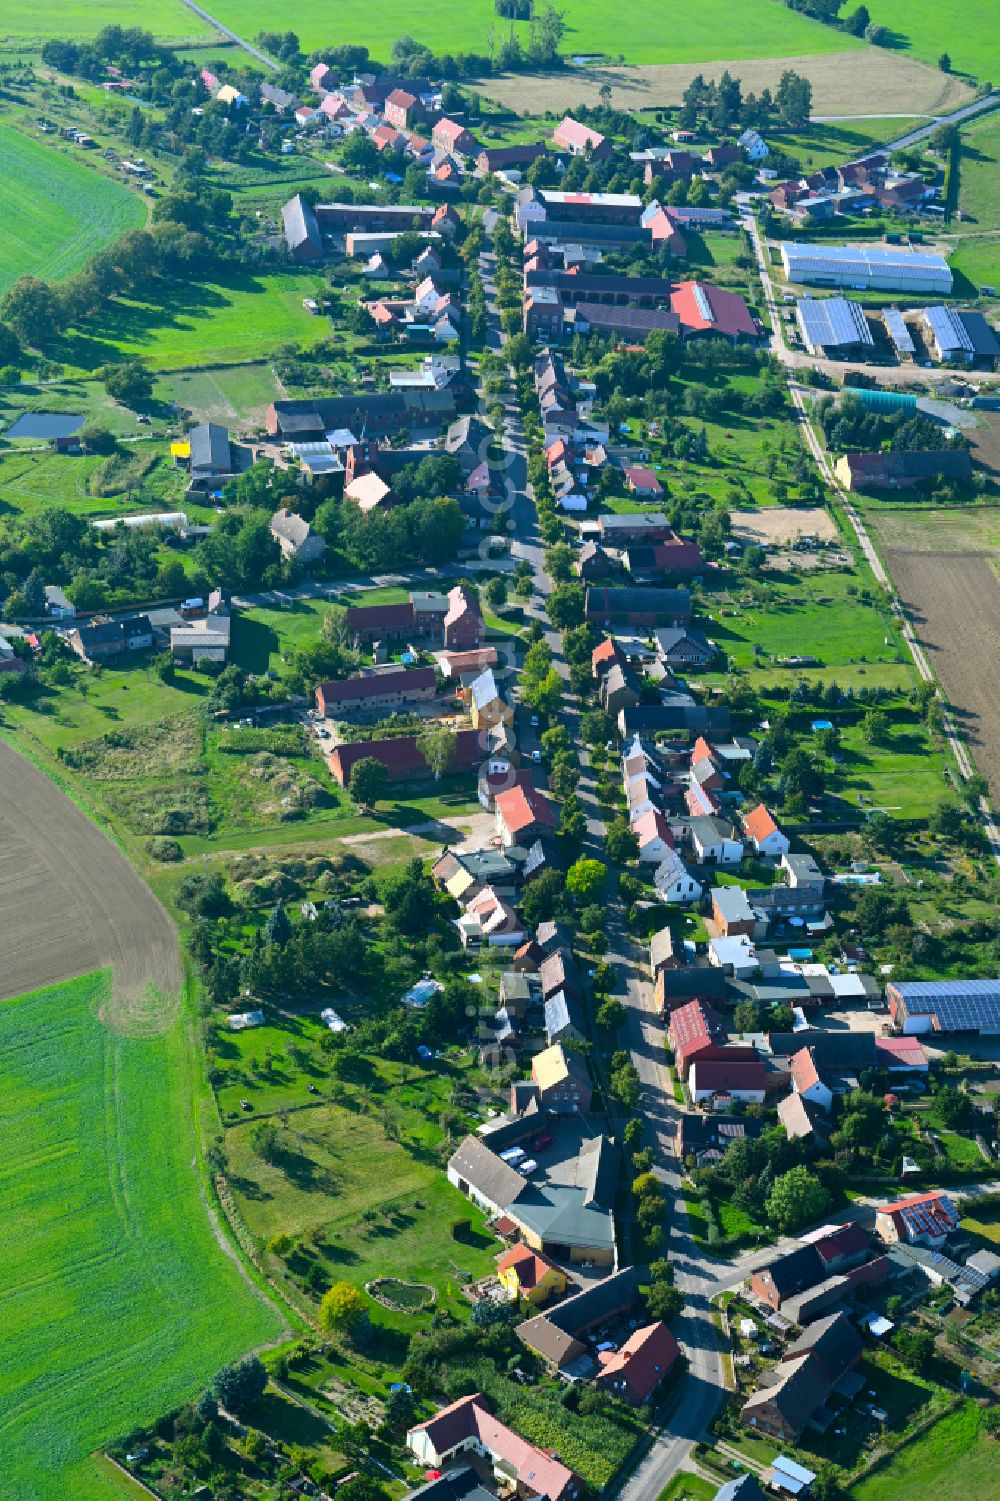 Melzwig from the bird's eye view: Village view on the edge of agricultural fields and land in Melzwig in the state Saxony-Anhalt, Germany